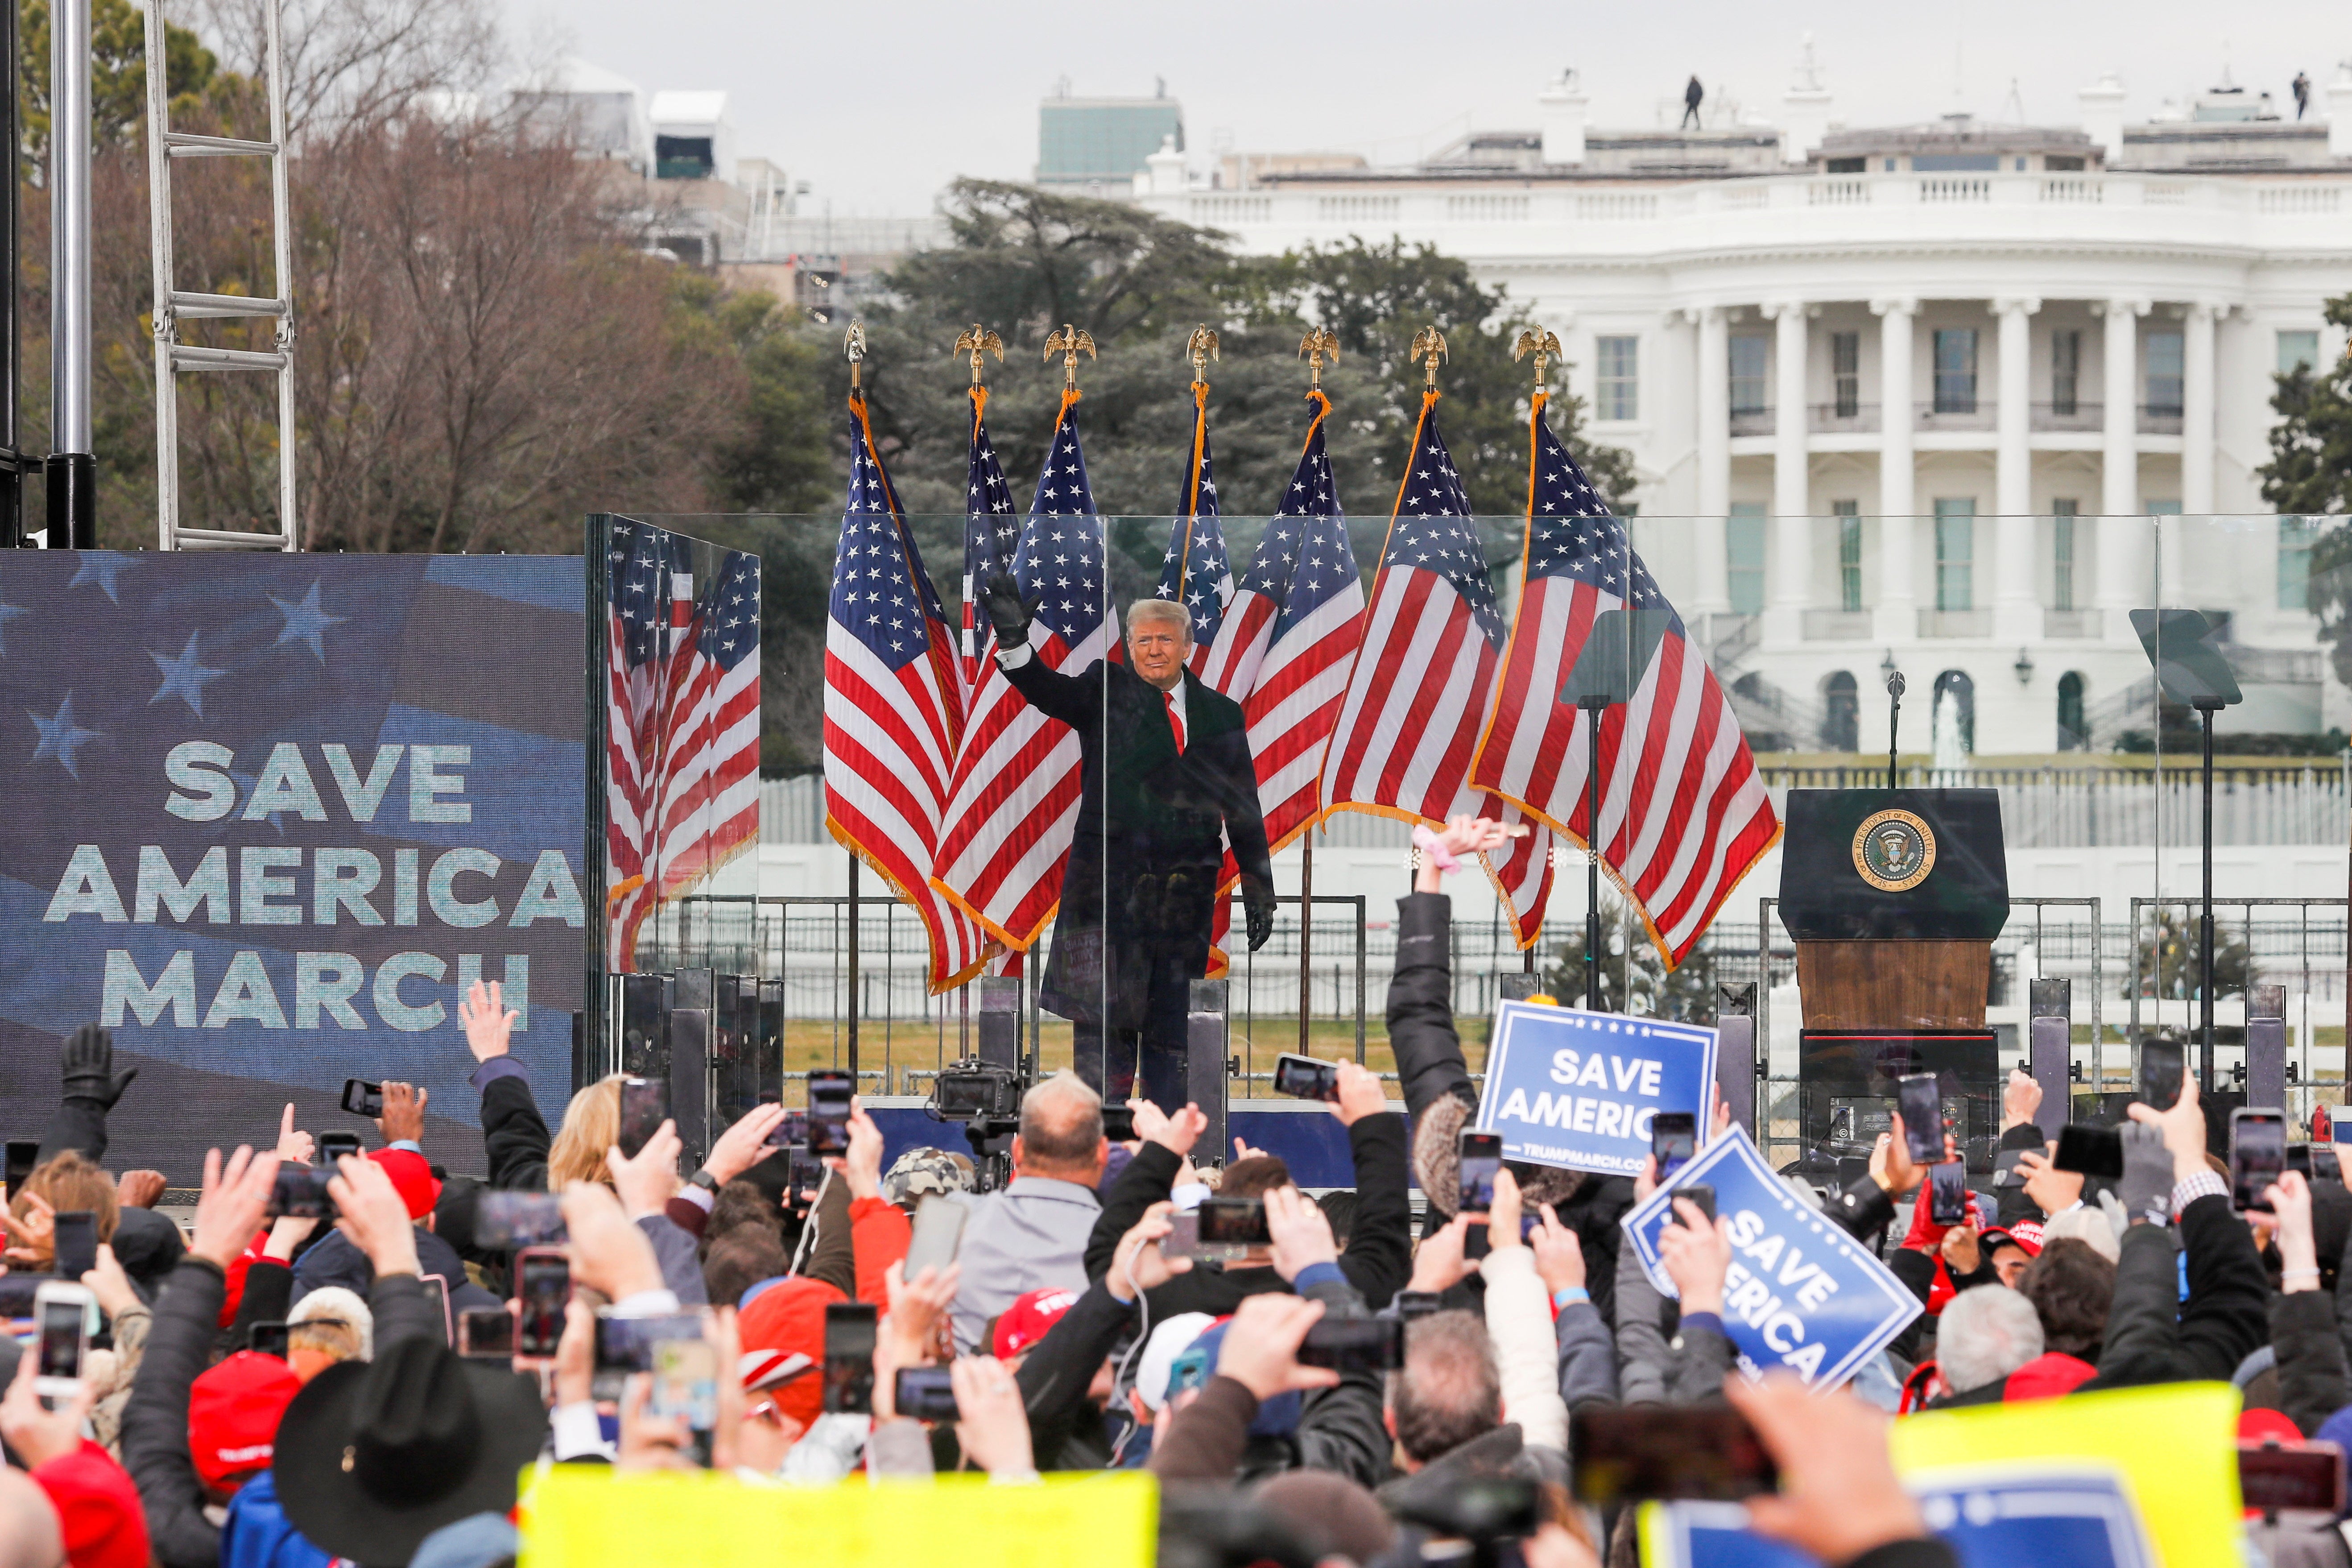 Donald Trump addresses supporters in Washington DC on January 6, 2021, before a mob stormed the Capitol to block the certification of Joe Biden's election.